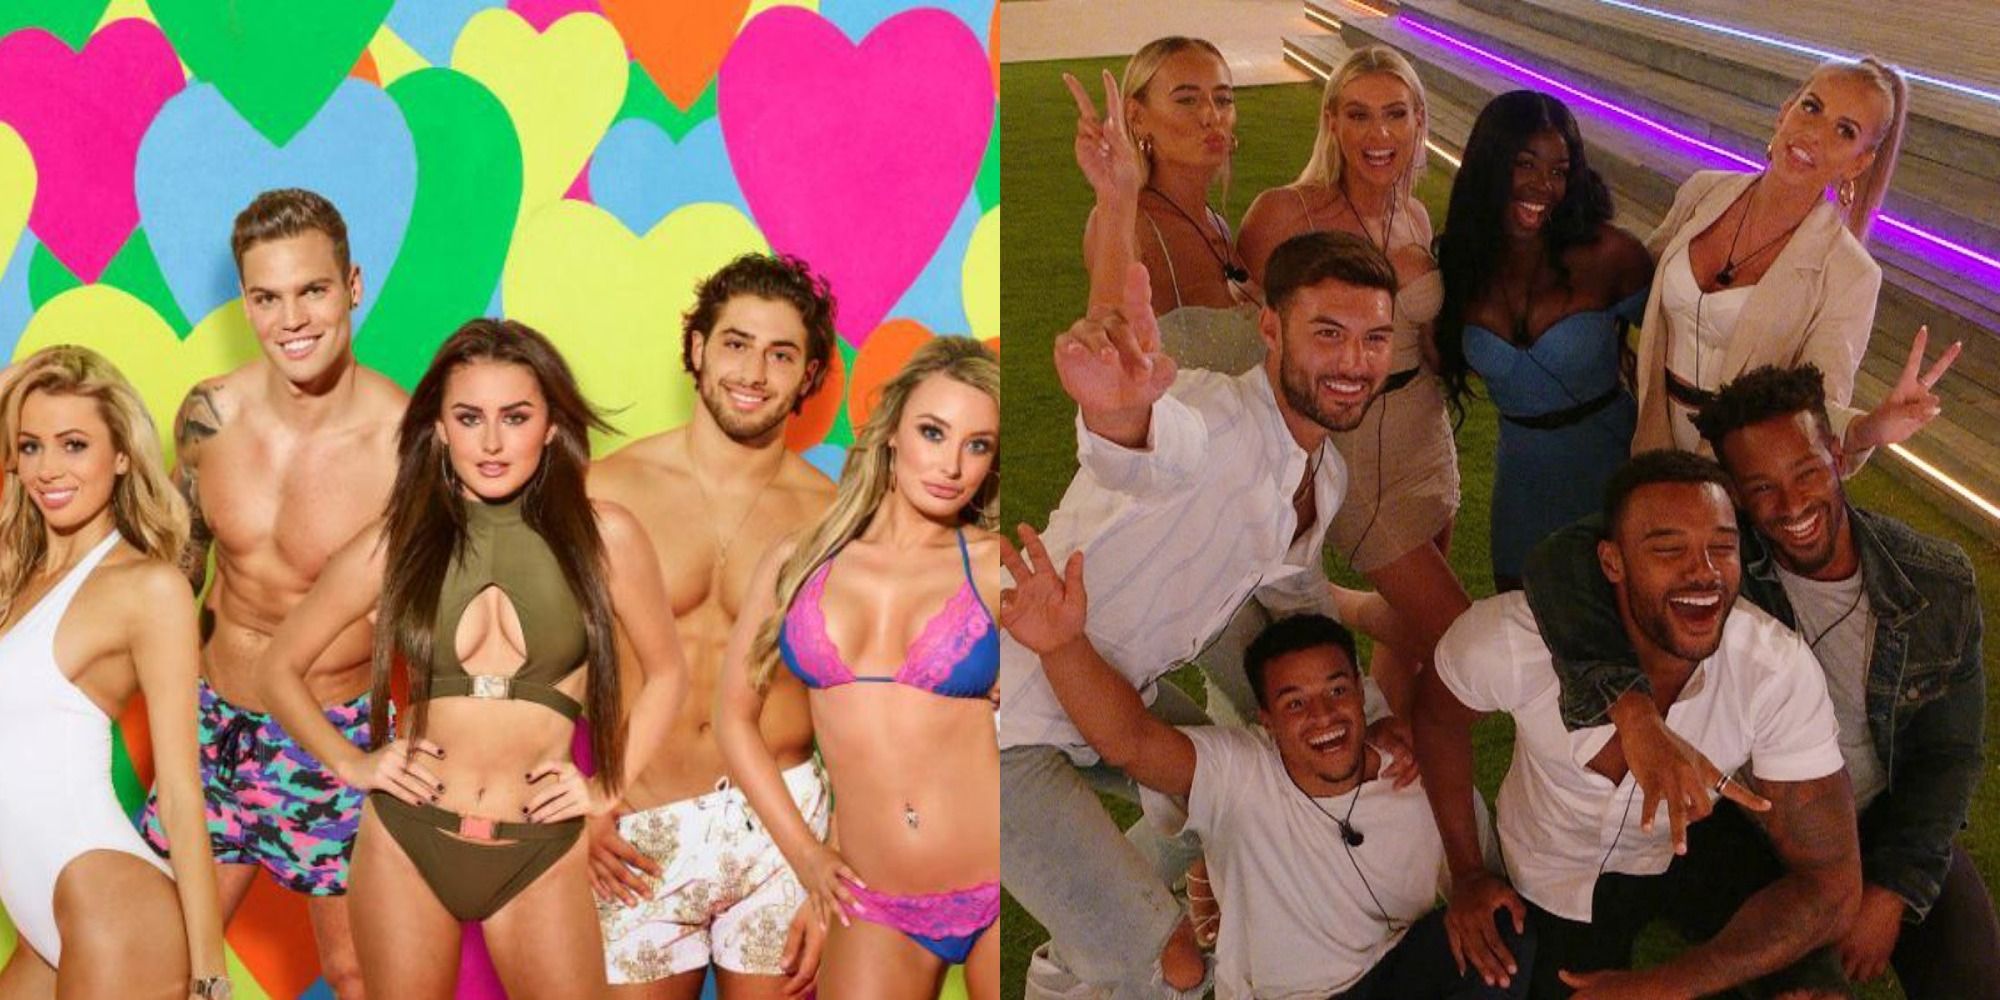 Split image showing different casts of Love Island UK